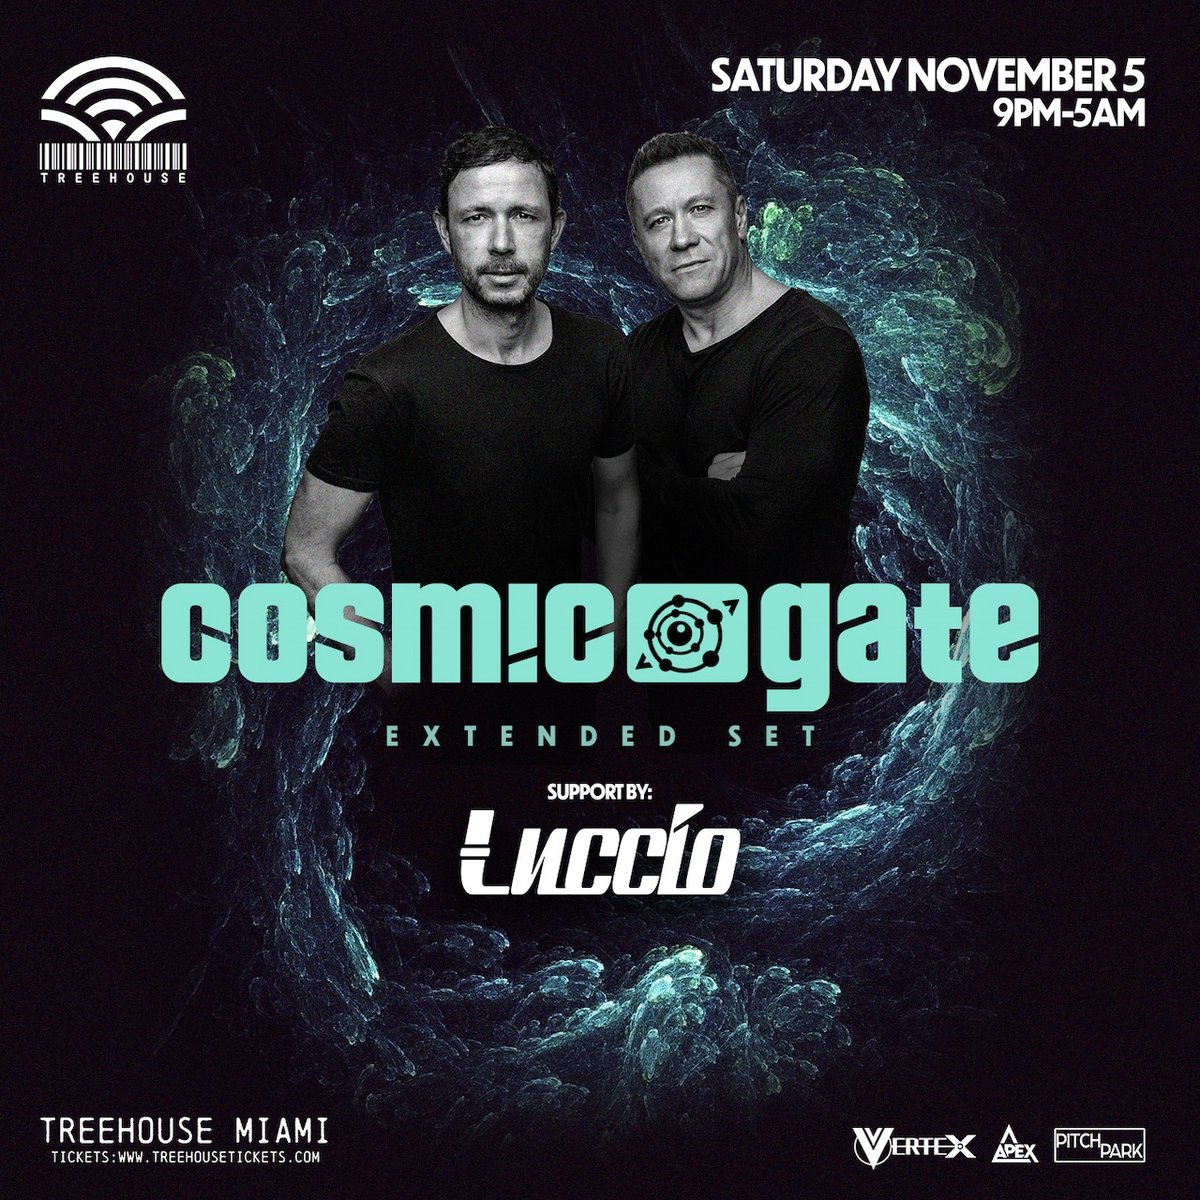 NEXT STOP ✈️ #MIAMI 😎 See you at @treehousemiami on Saturday, November 05! Tickets eventbrite.com/e/cosmic-gate-…